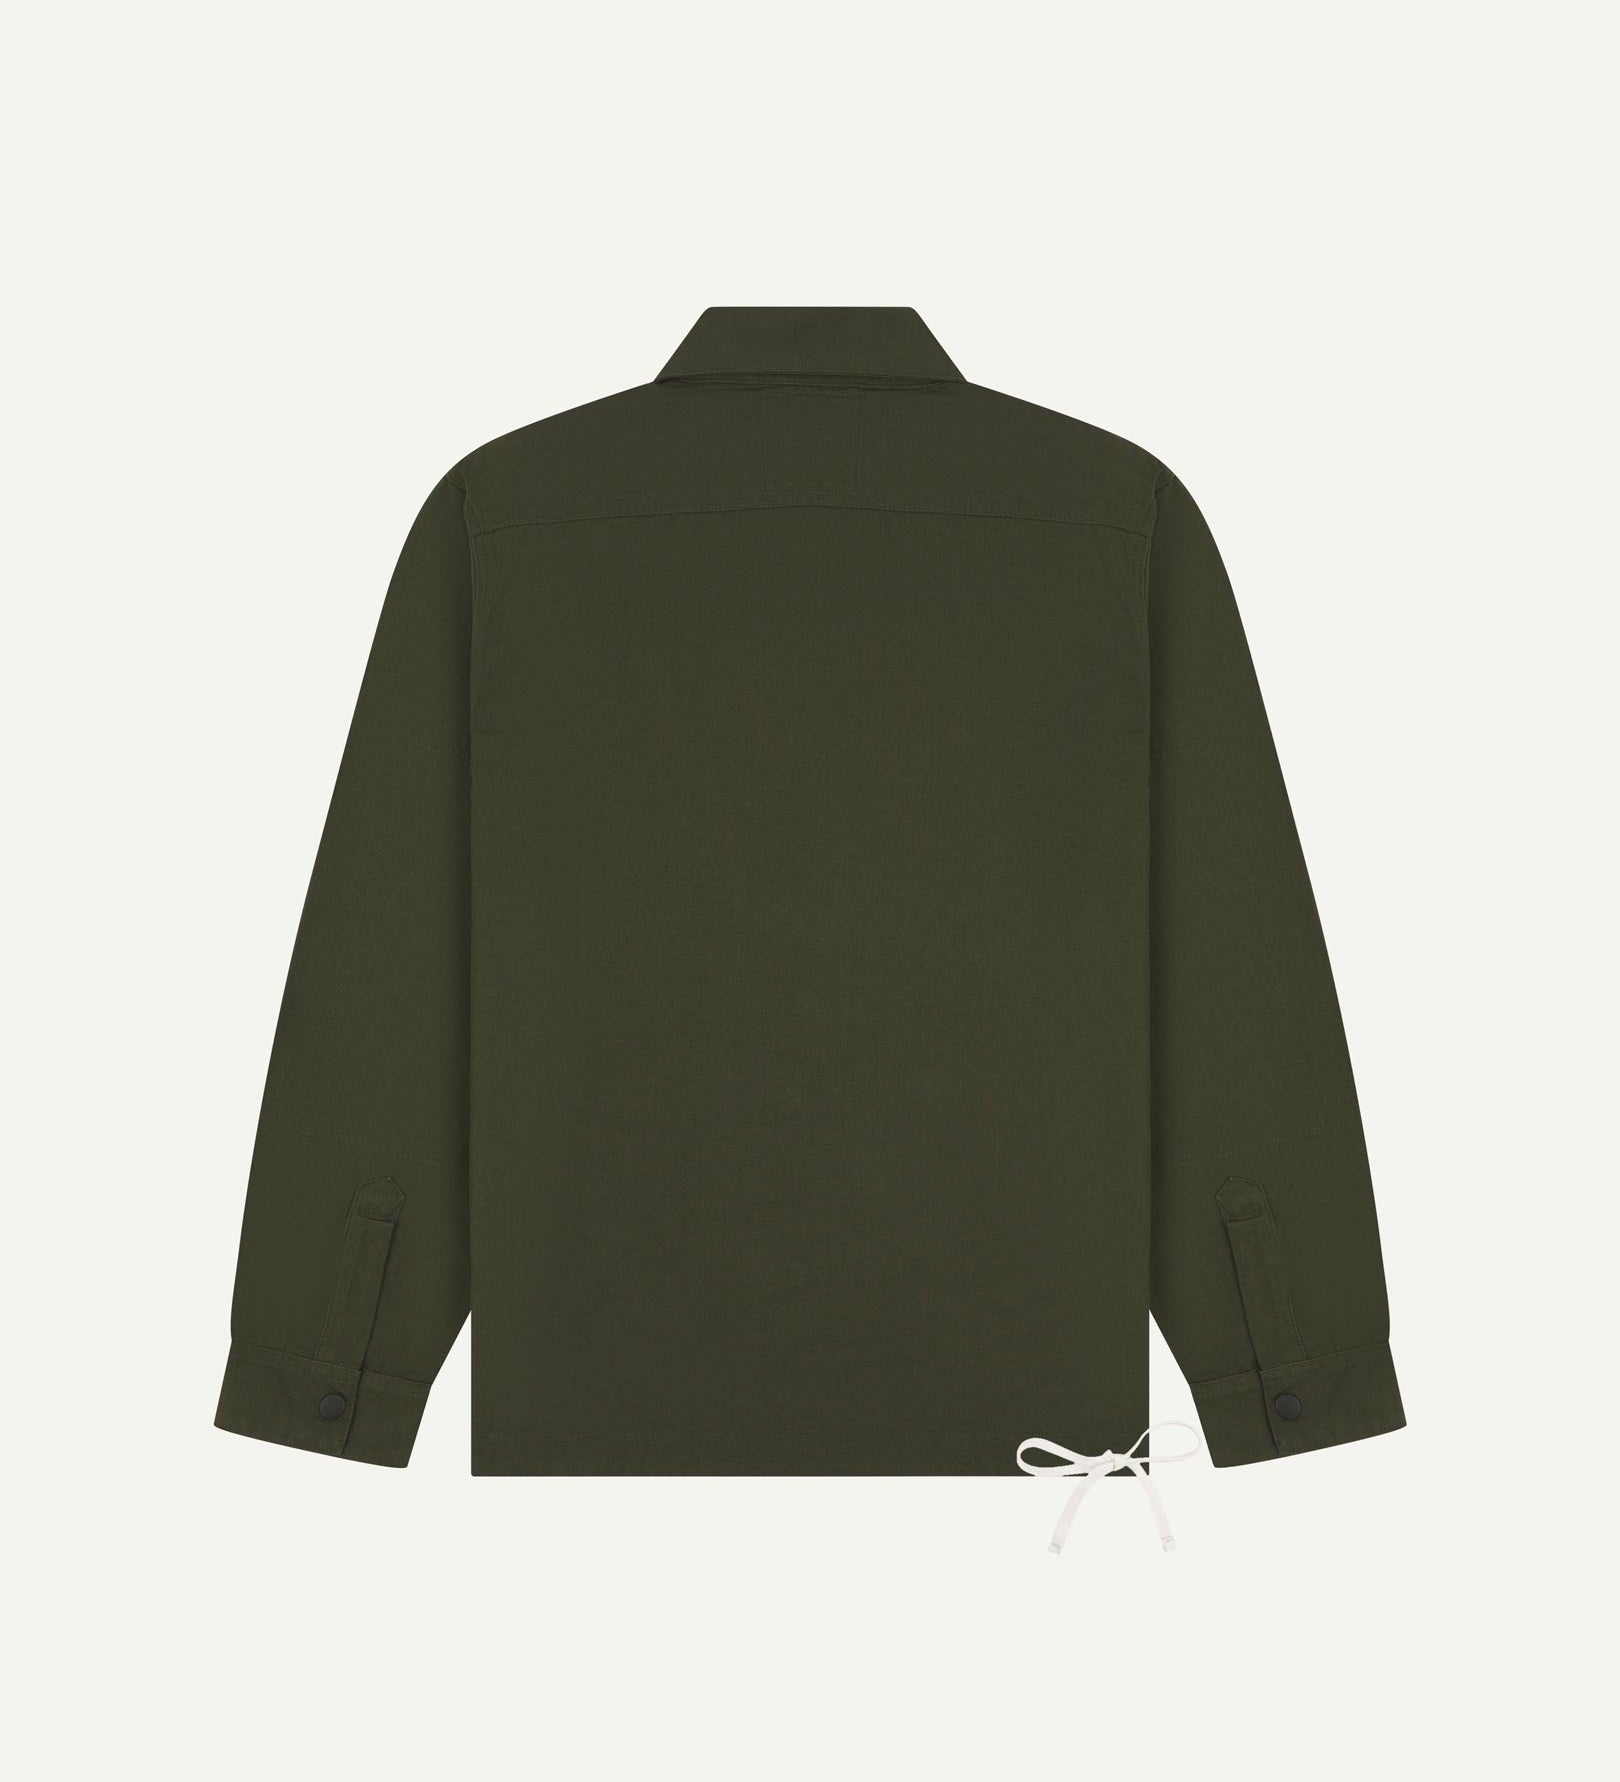 Full back view of Uskees vine green organic cotton coach jacket showing reinforced elbows and simple design.